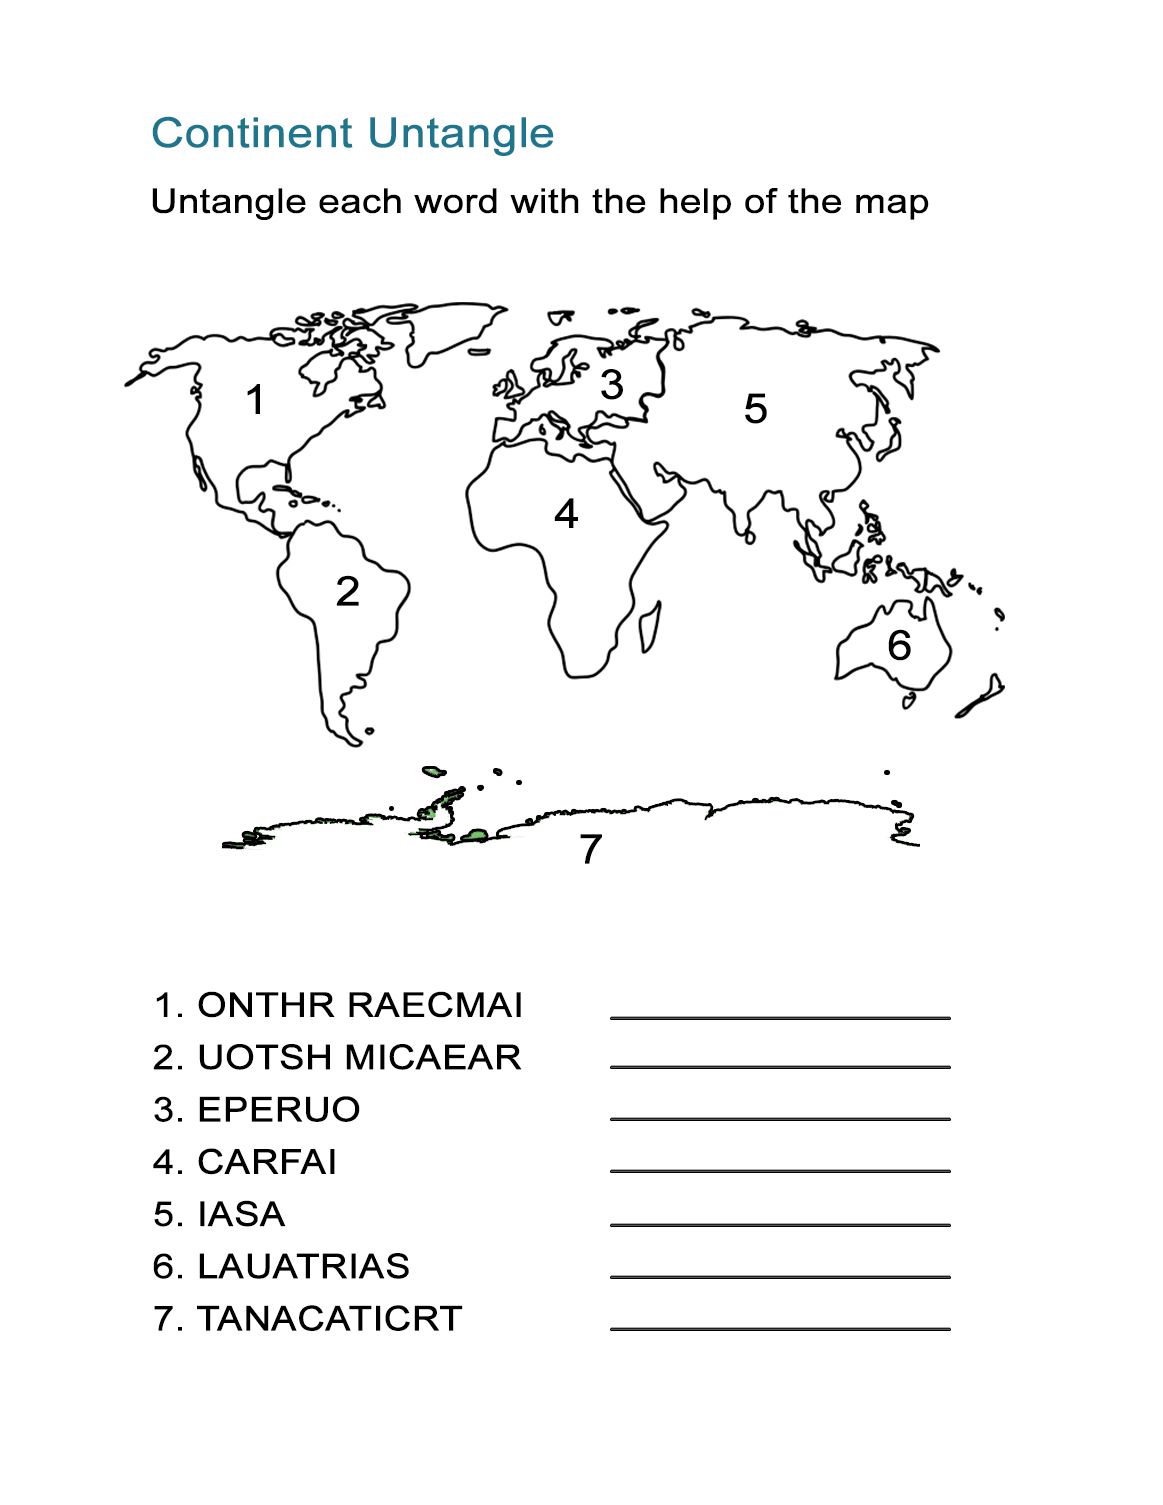 Continents Worksheet: Can You Spell Each Continent Correctly? - All Esl | Continents Worksheet Printable